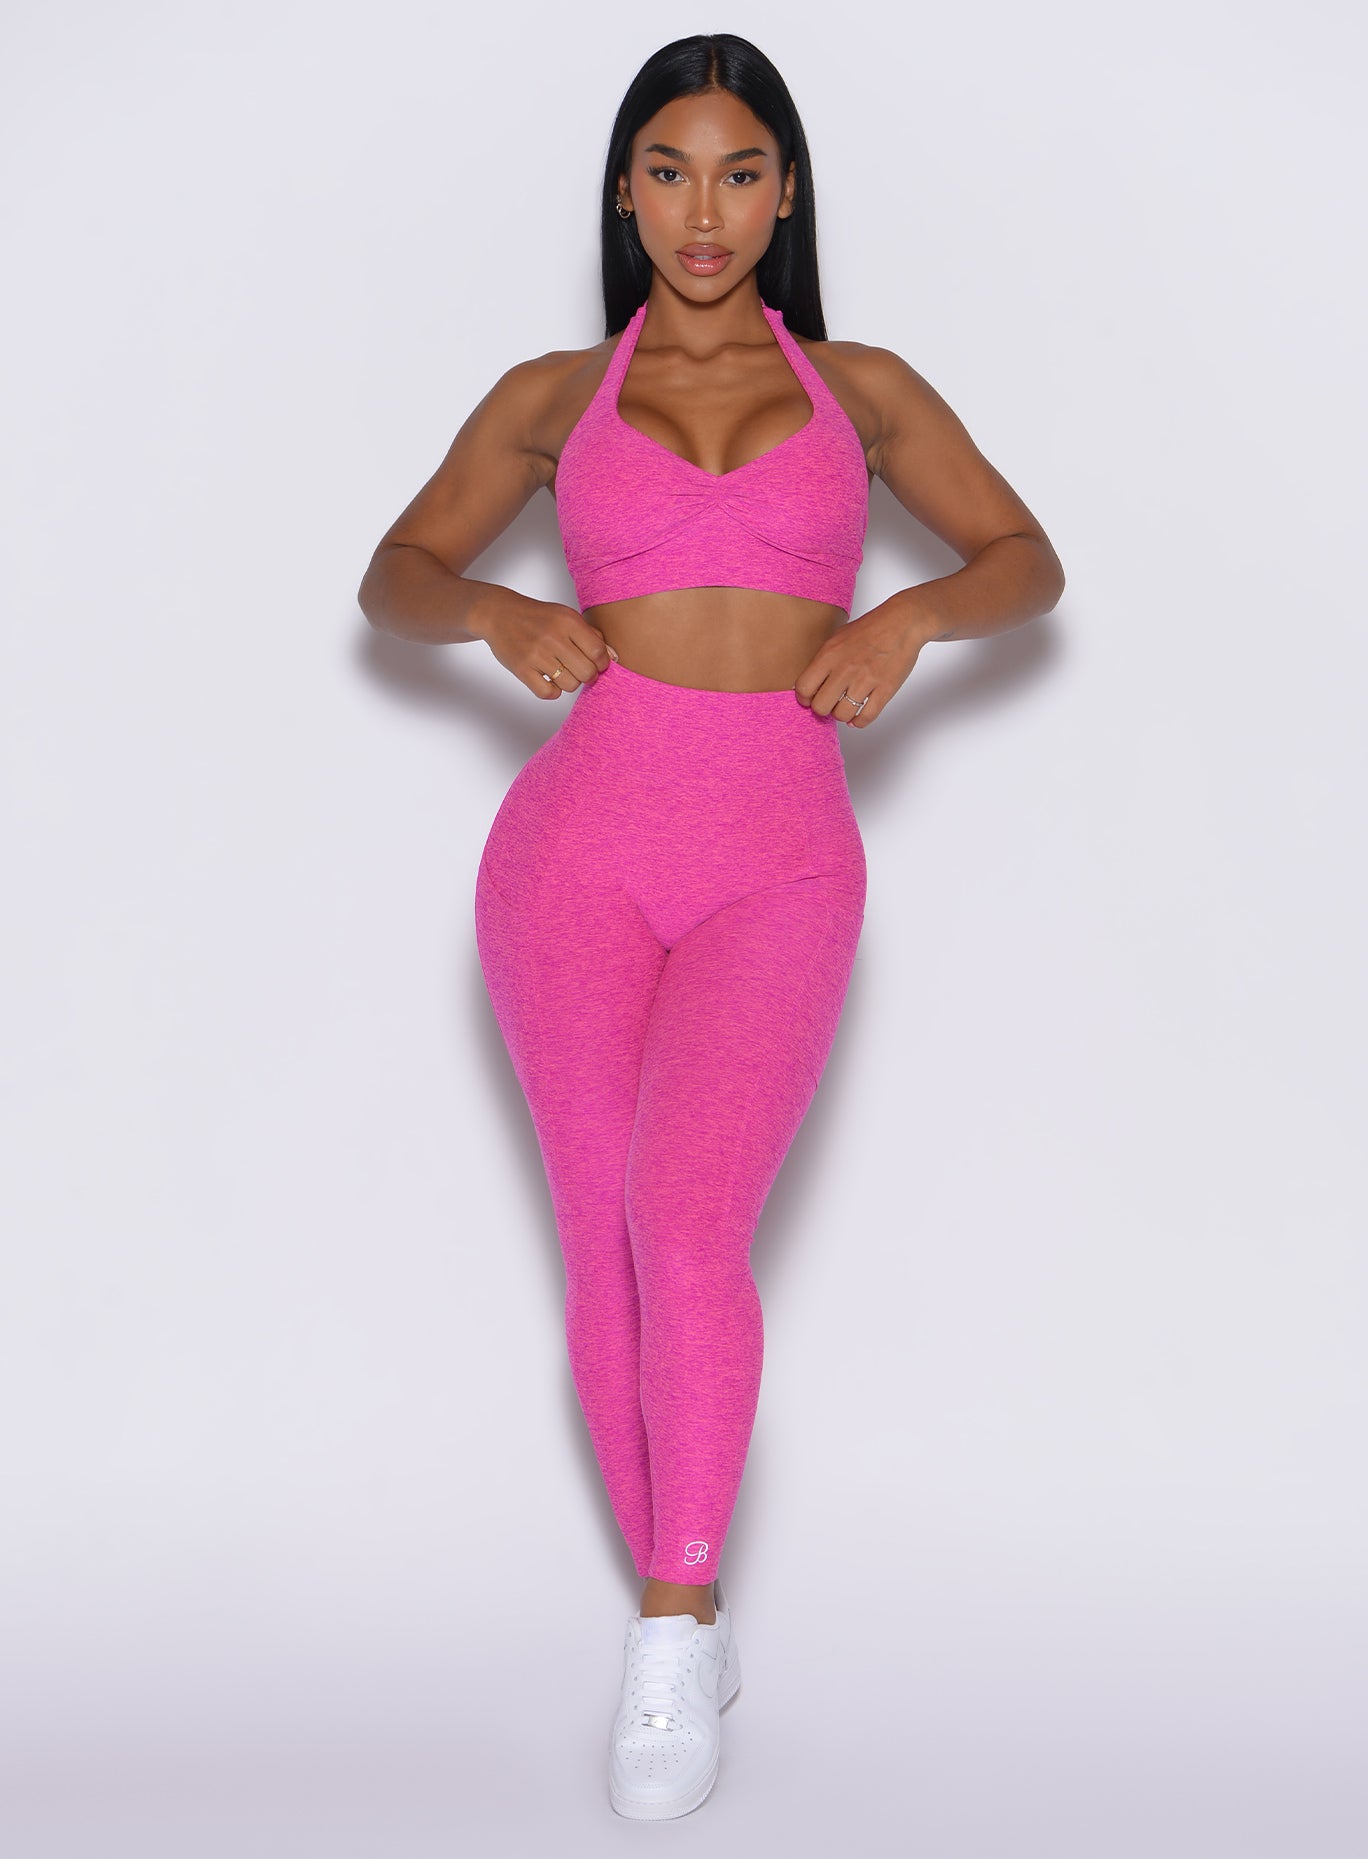 front profile view of a model adjusting her waistband wearing our V back leggings in Neon pink sorbet color along with a matching bra